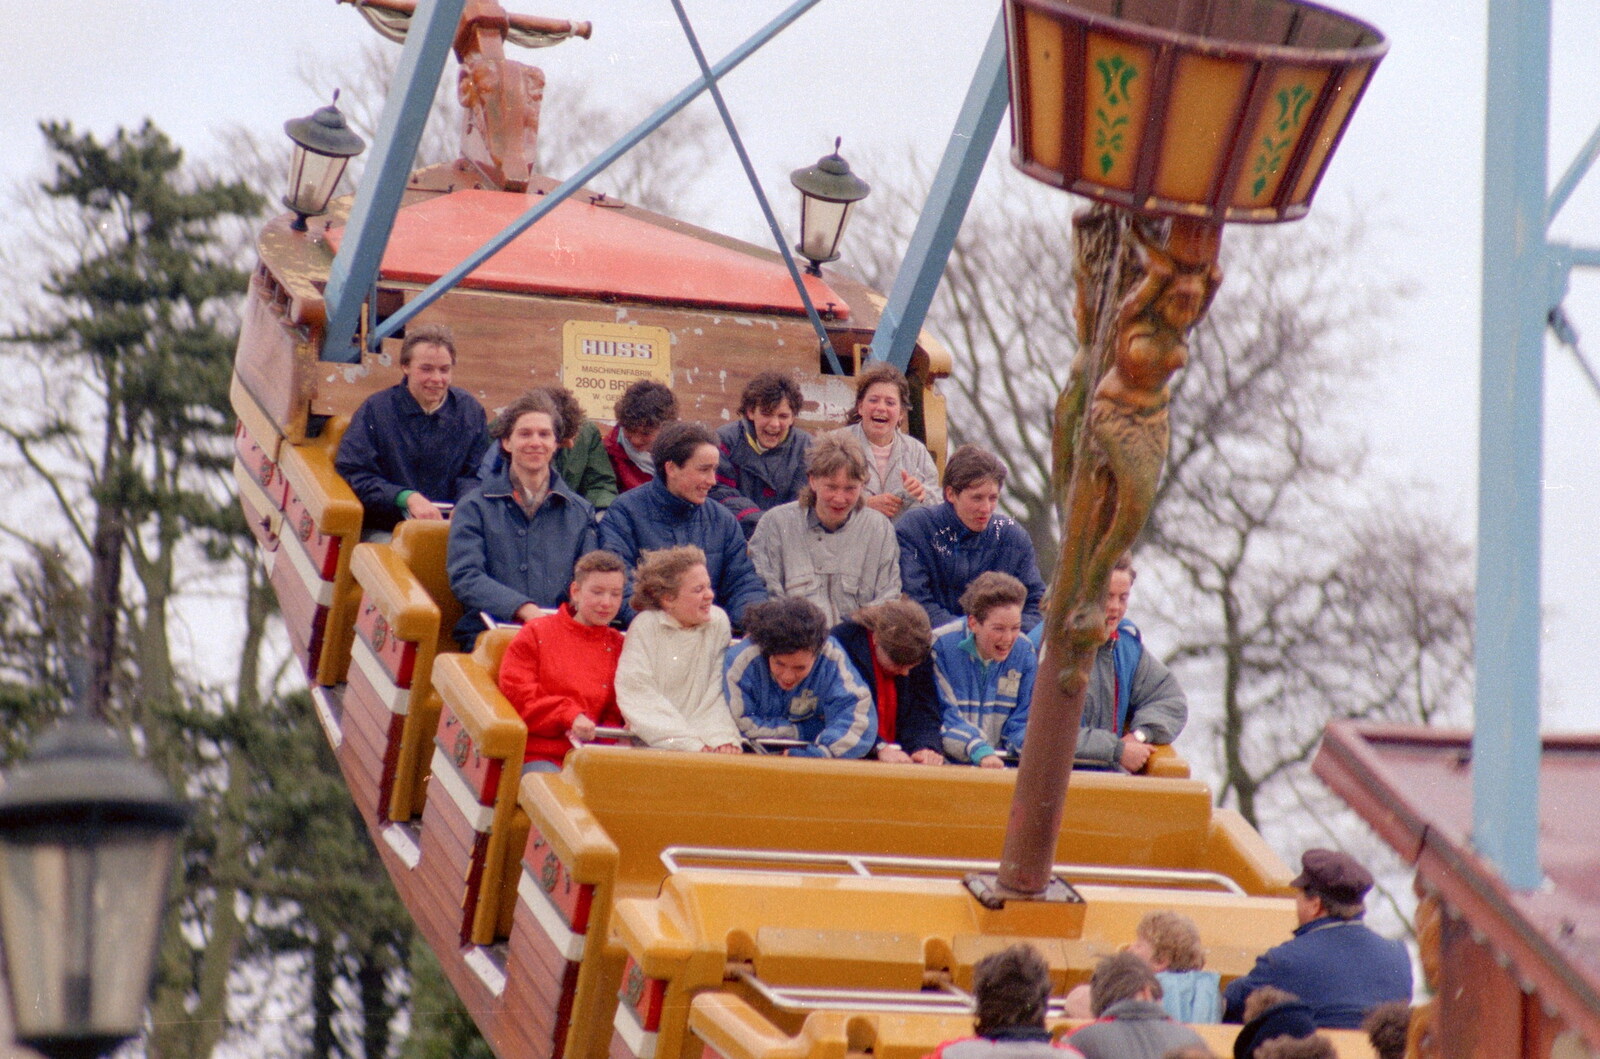 Sean tries to hold it in whilst on the Pirate Ship ride from Easter With Sean in Macclesfield, Cheshire - 6th April 1986